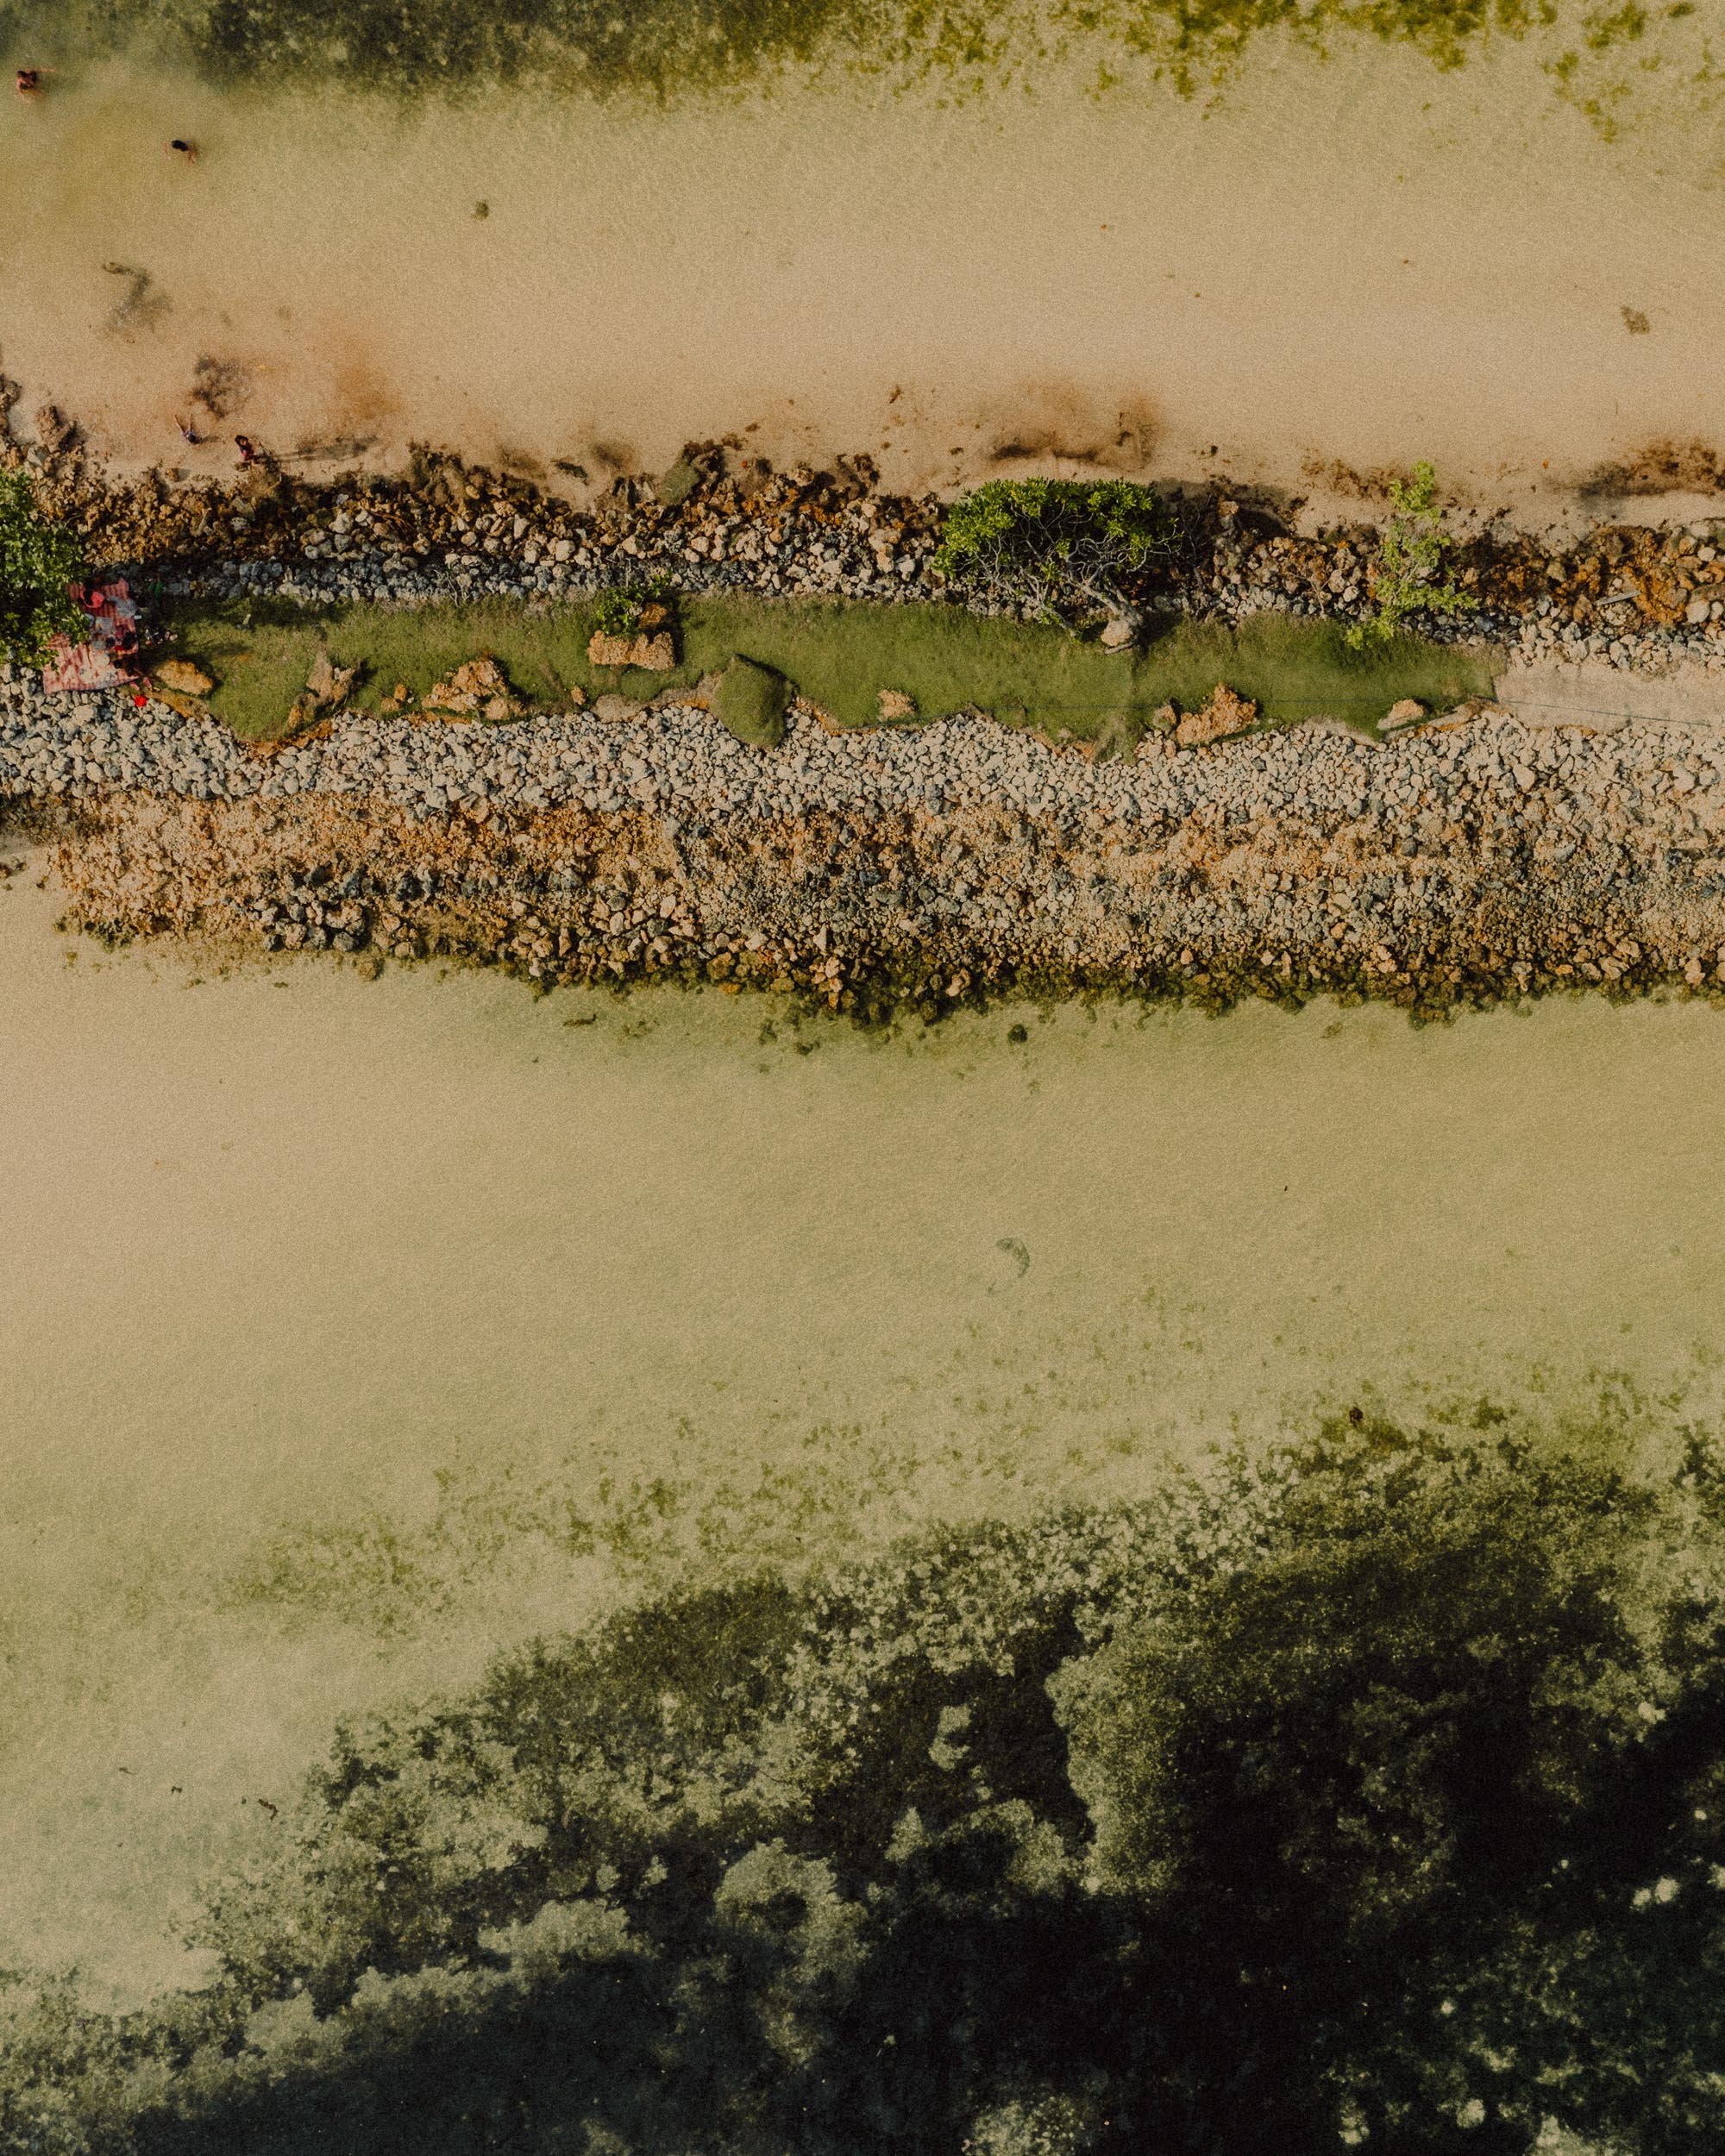 15-Siargao Drone Photography-A bird's-eye view aerial photo of Malinao Paradise, Siargao, Philippines, Southeast Asia, April 2022, Mavic 2 Pro, Hasselblad L1D-20c.jpg